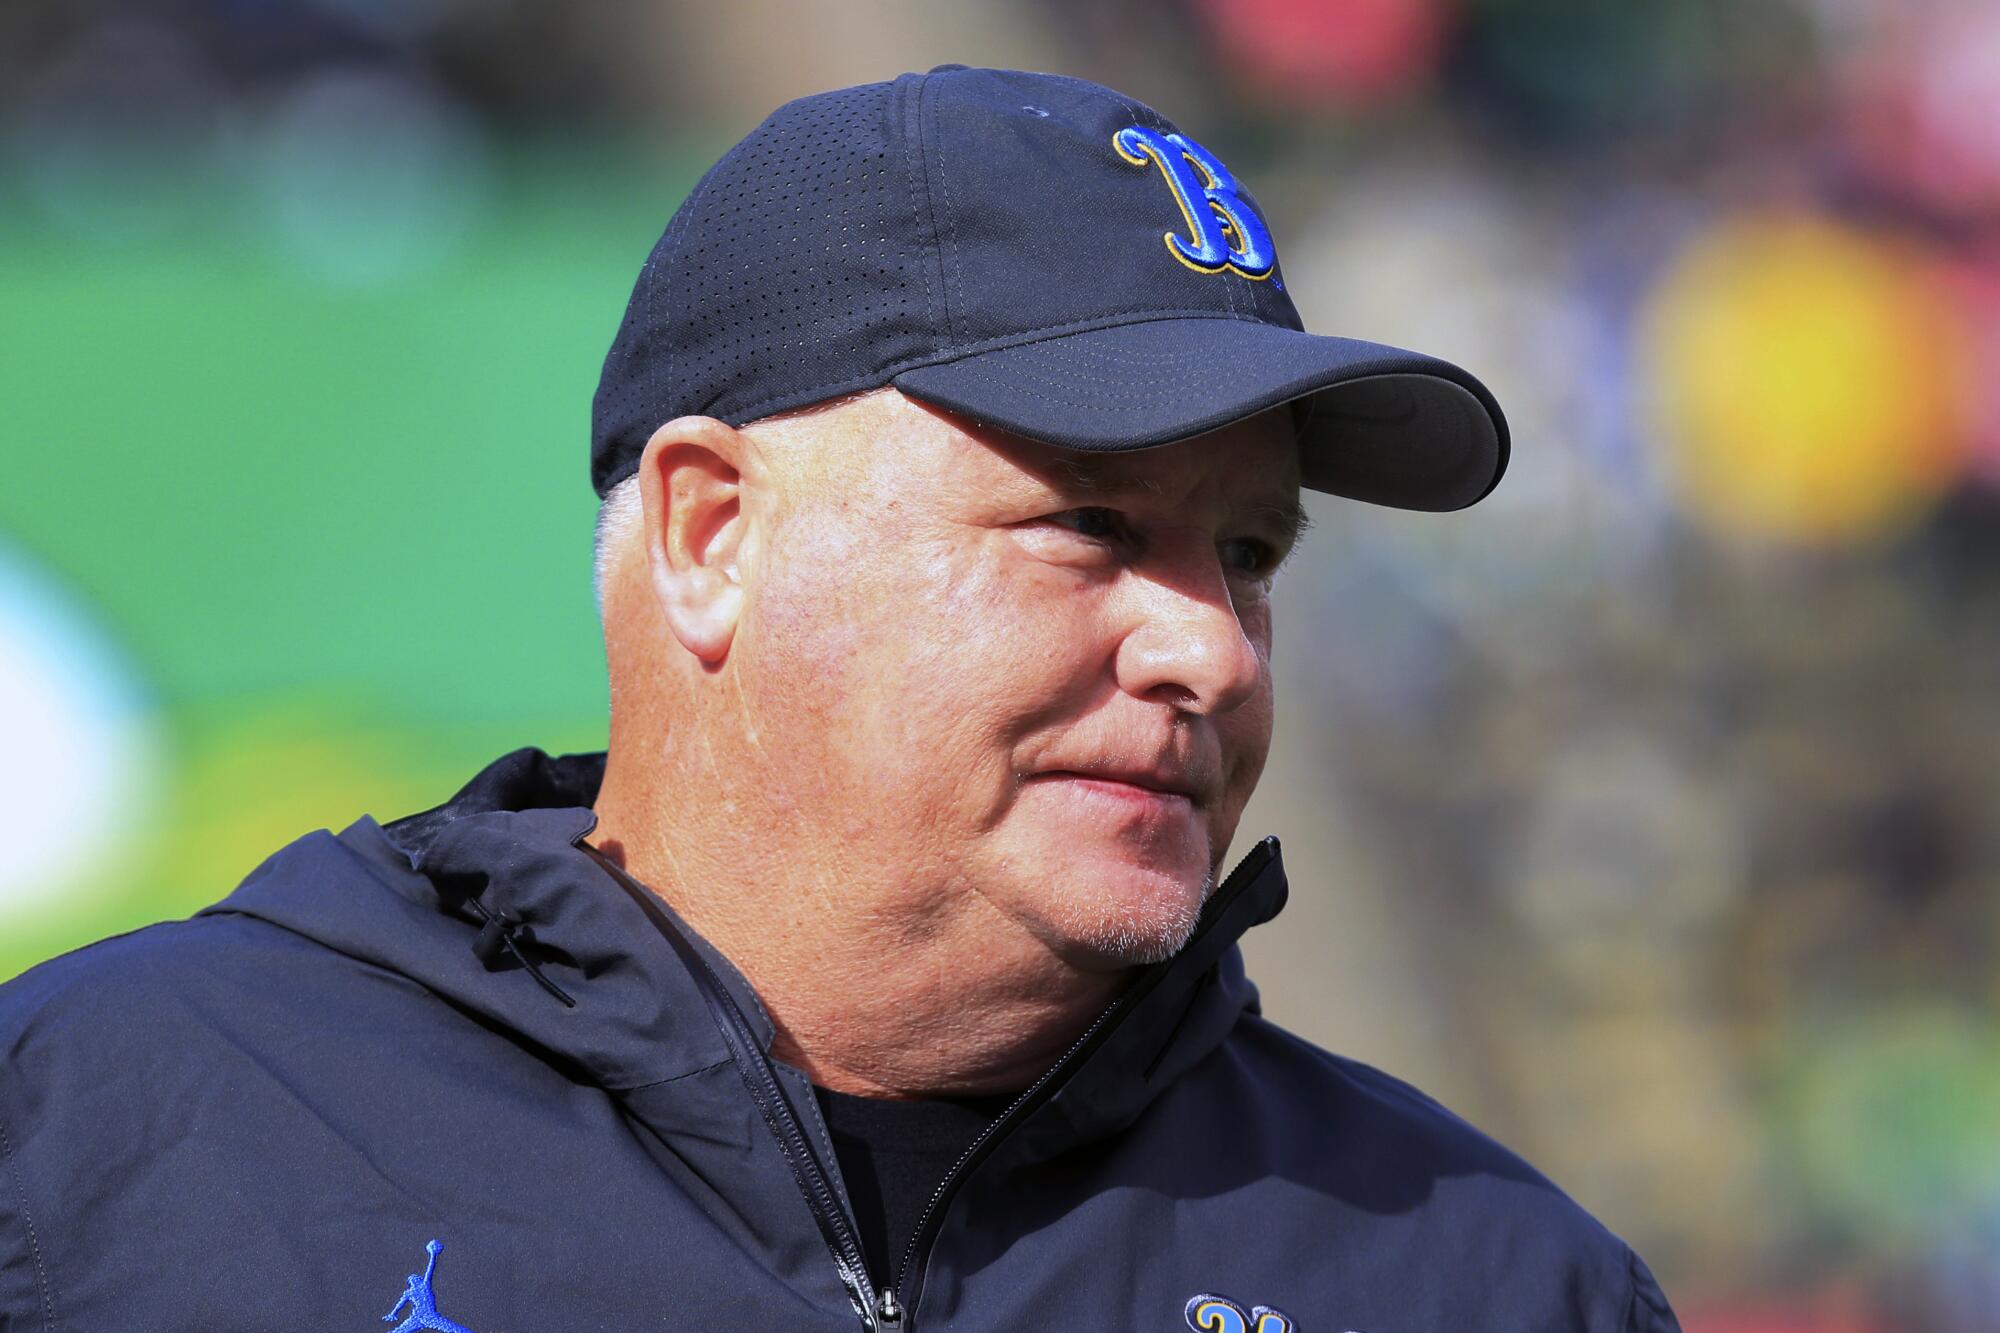 UCLA football coach Chip Kelly stands on the field before a game.